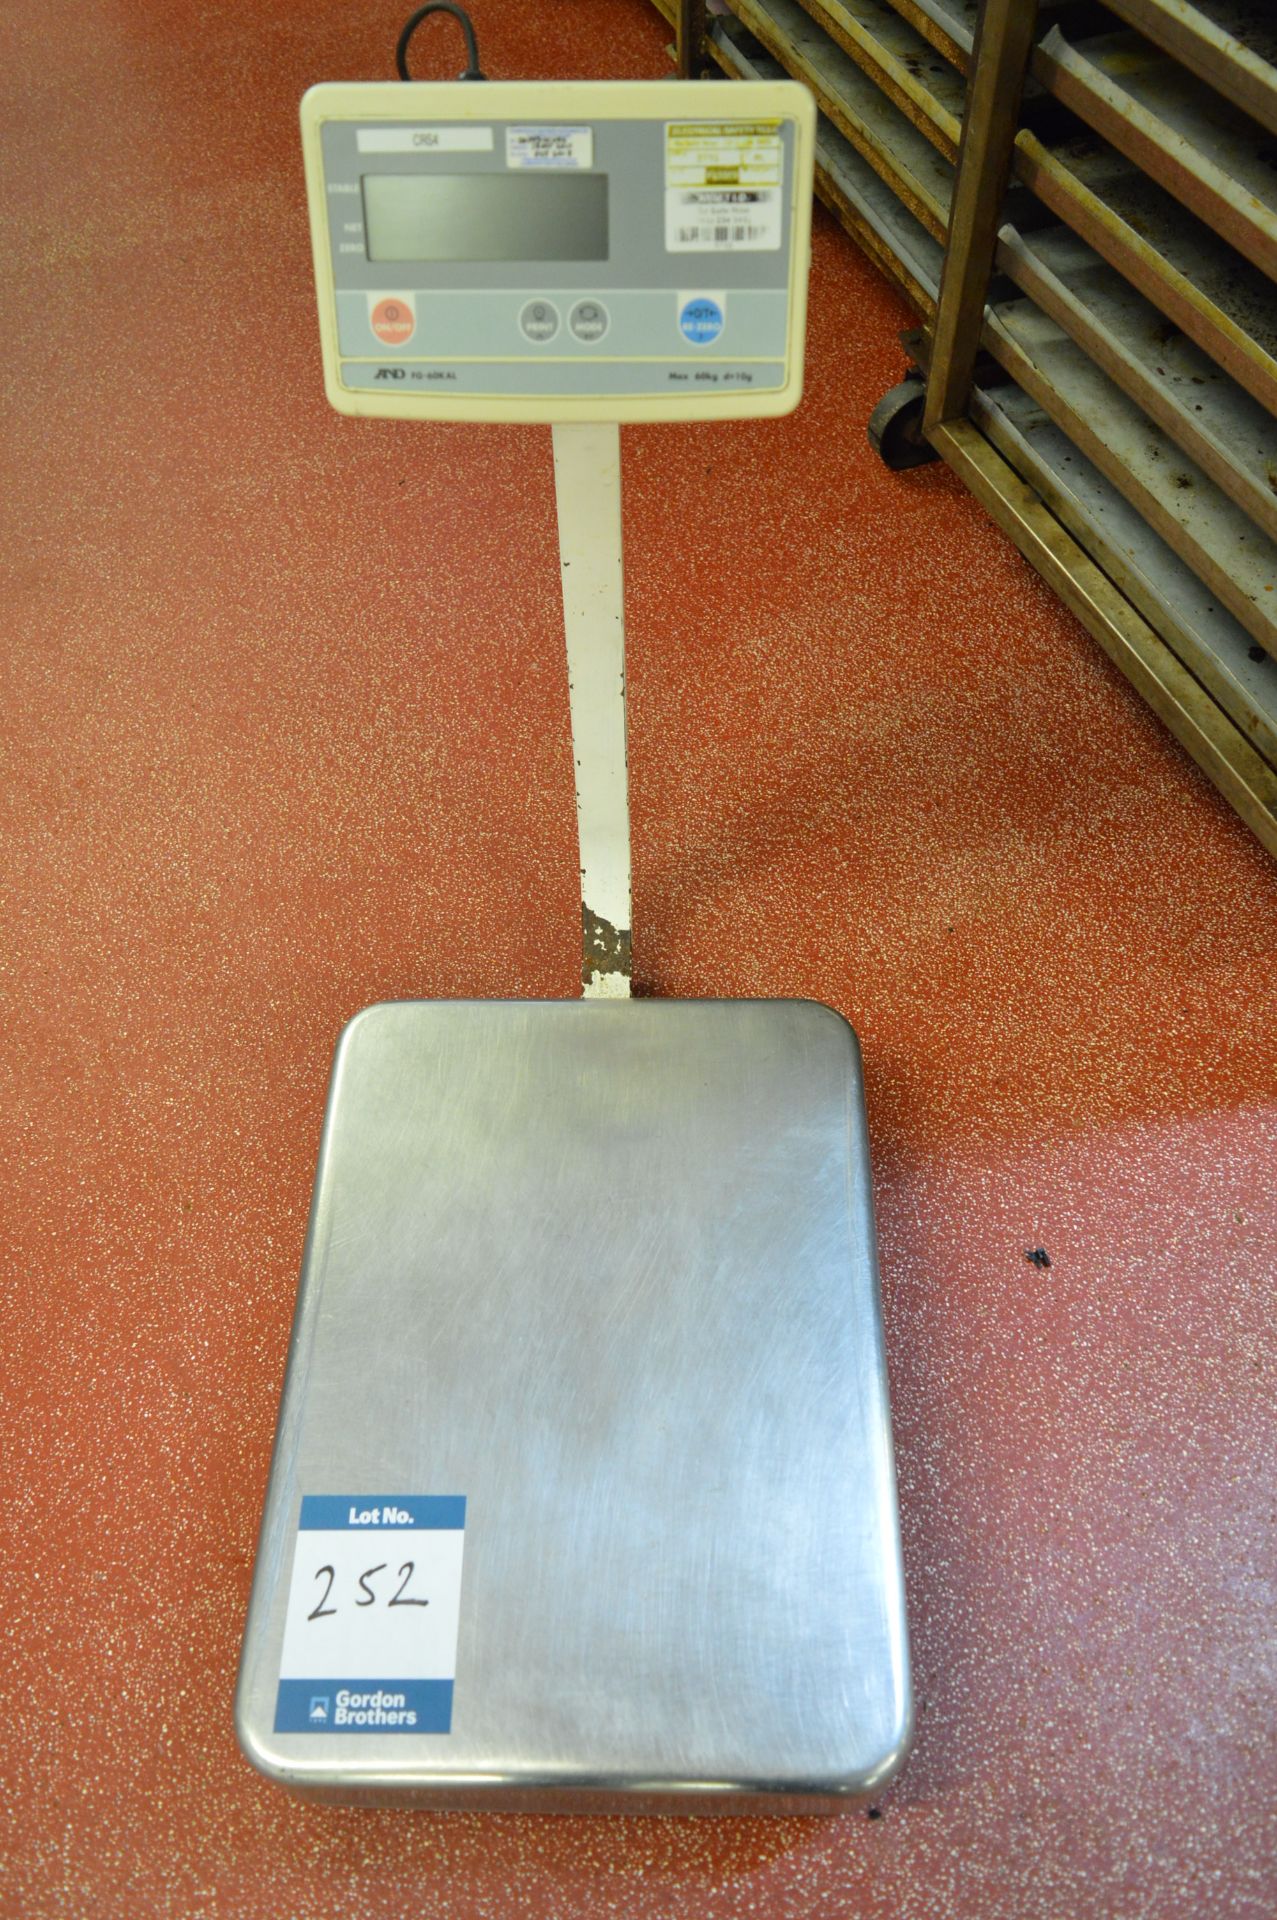 AND, FG-60 KAL, 60kg scales (all faults) (Located at Crantock Bakery, Newquay)